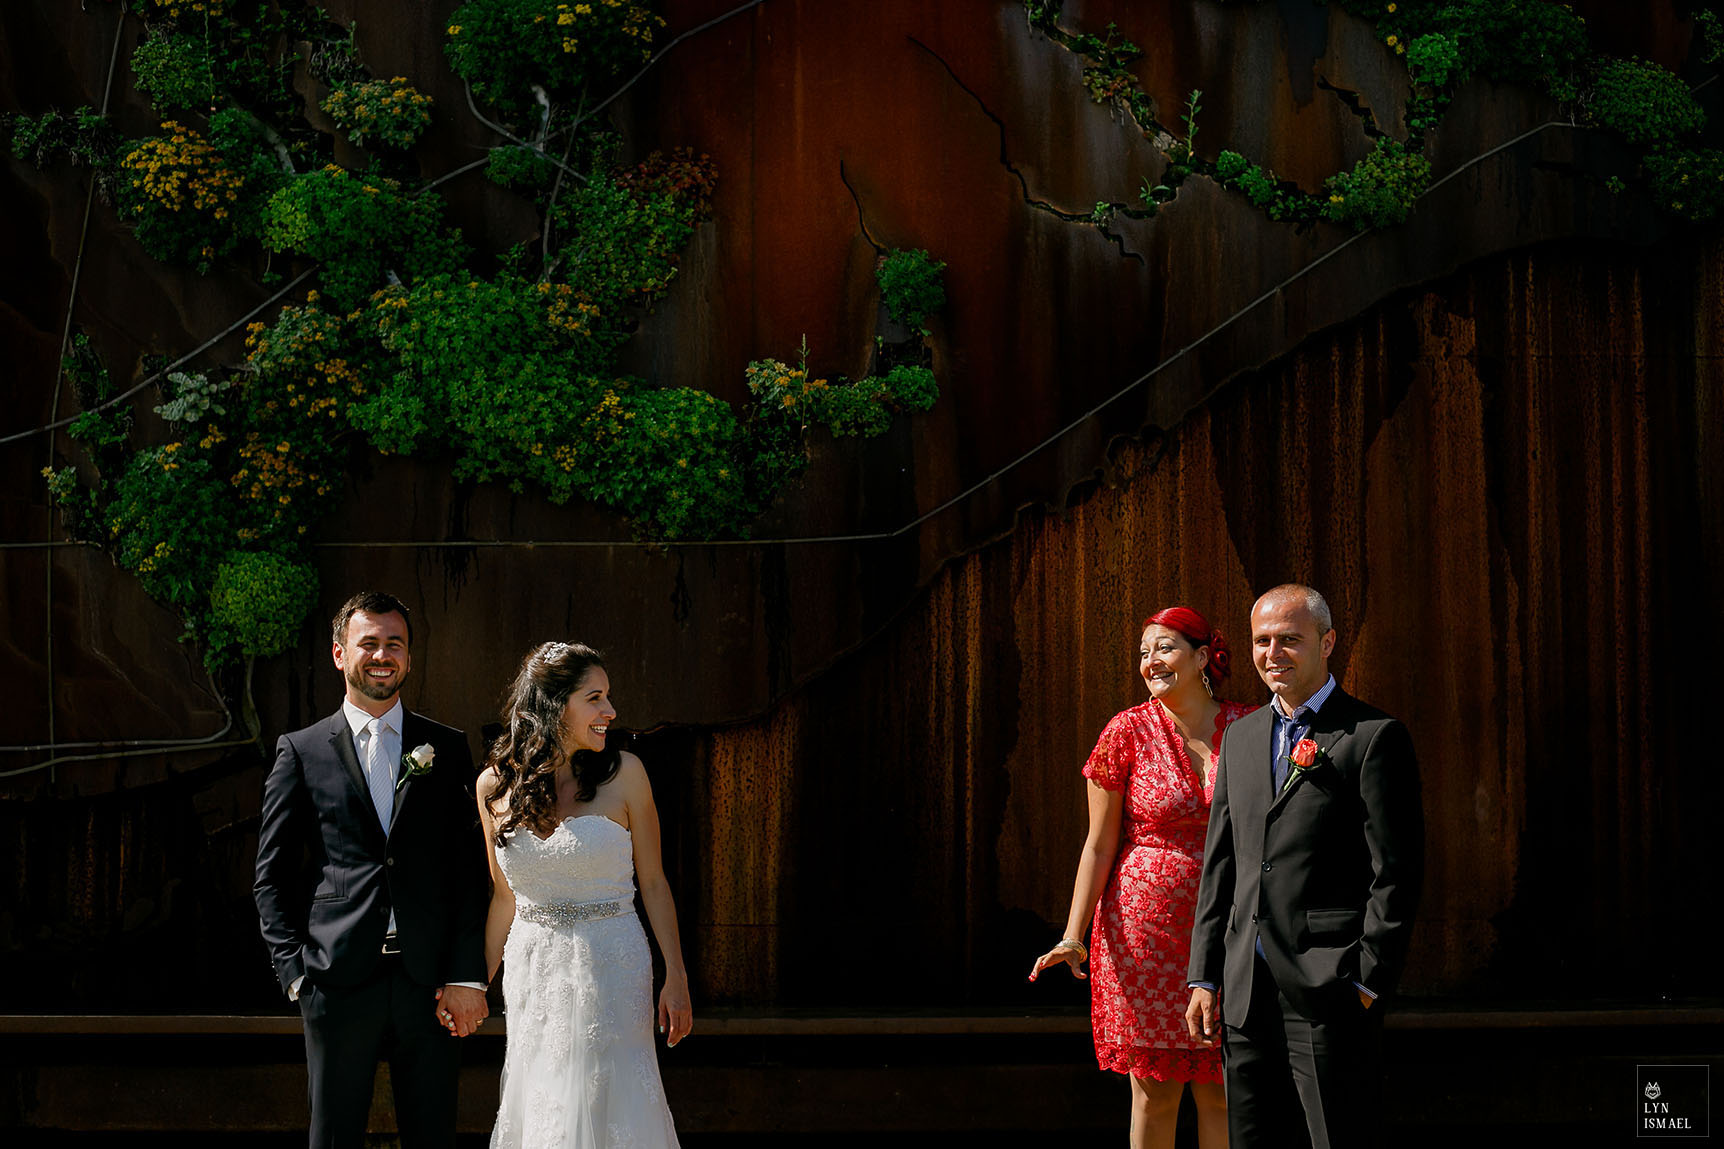 Bride and groom with the Maid of Honour and Best Man standing in harsh light at Ever Green Brick Works